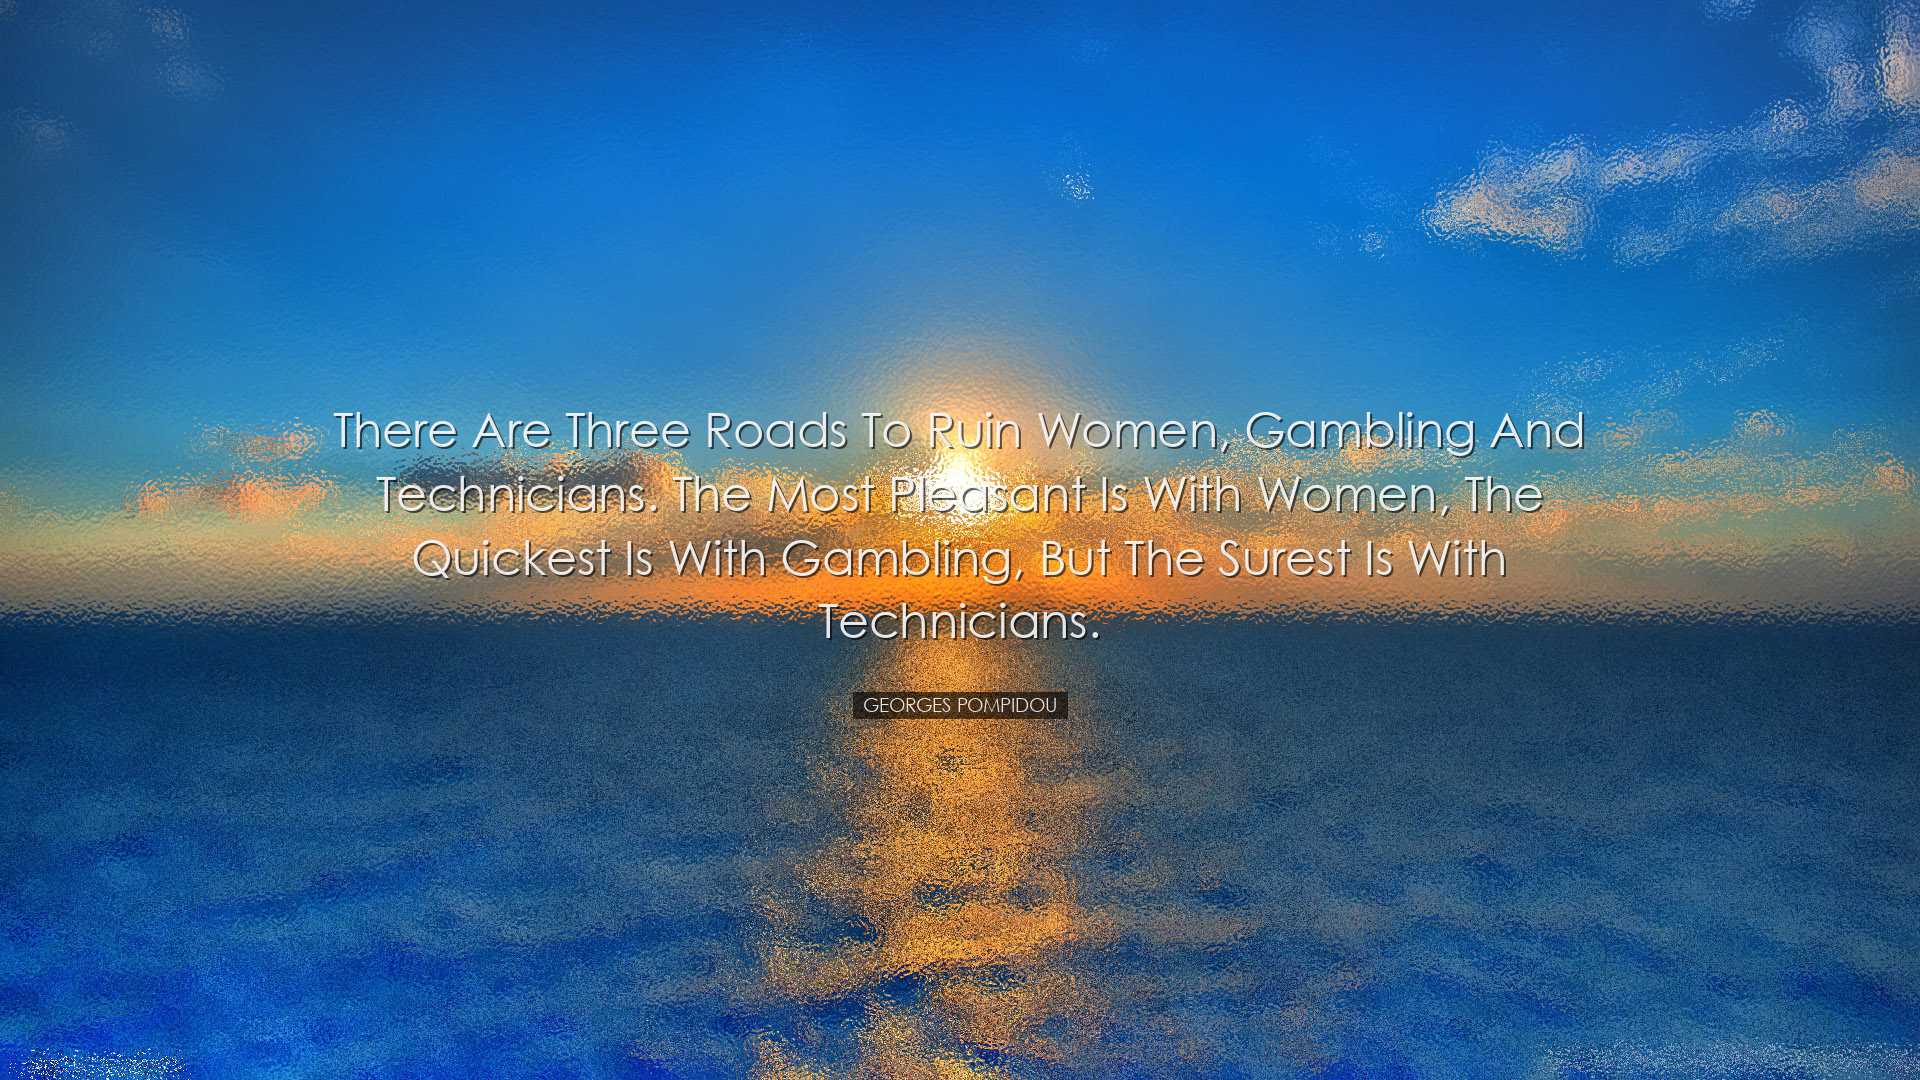 There are three roads to ruin women, gambling and technicians. The